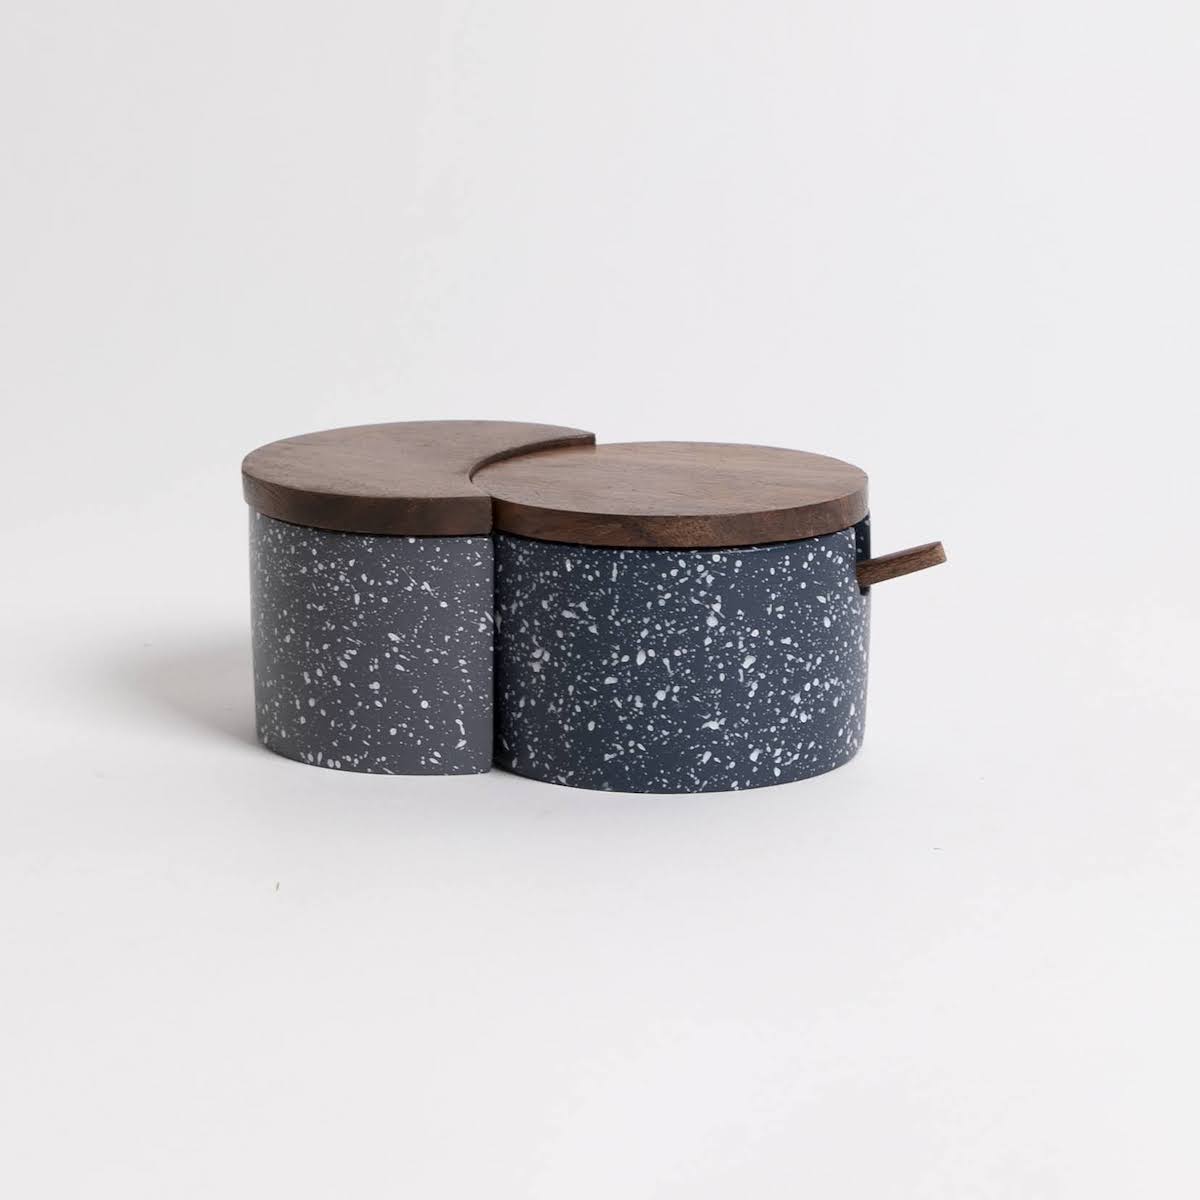 Speckled Cement Salt and Pepper Set with Wood Lid and Spoon - P I C N I C 